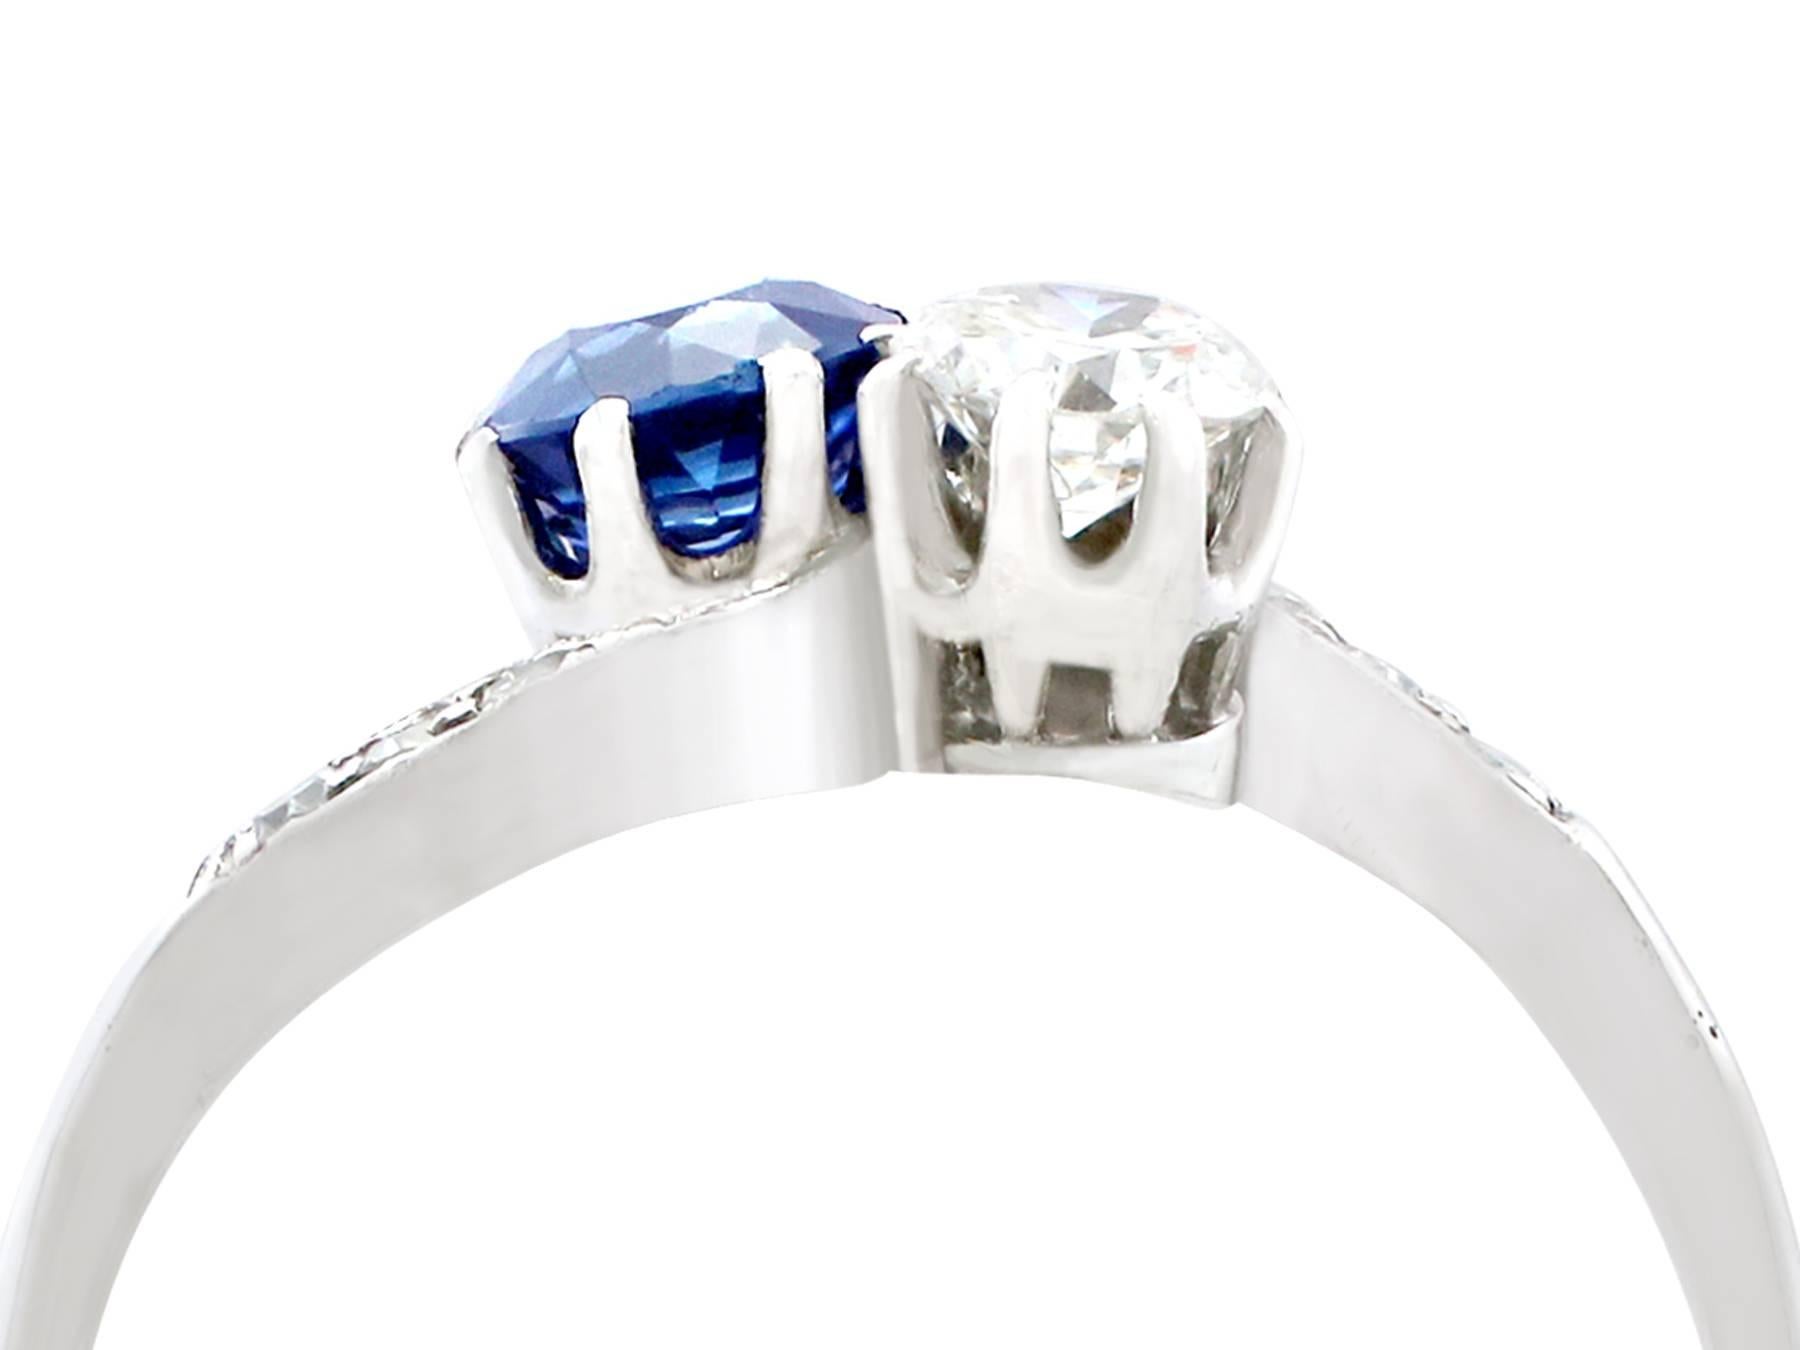 An impressive antique 1920s 0.46 carat sapphire and 0.23 carat diamond, 18 karat white gold twist ring; part of our diverse antique jewelry and estate jewelry collections.

This fine and impressive 1920s sapphire and diamond twist ring has been